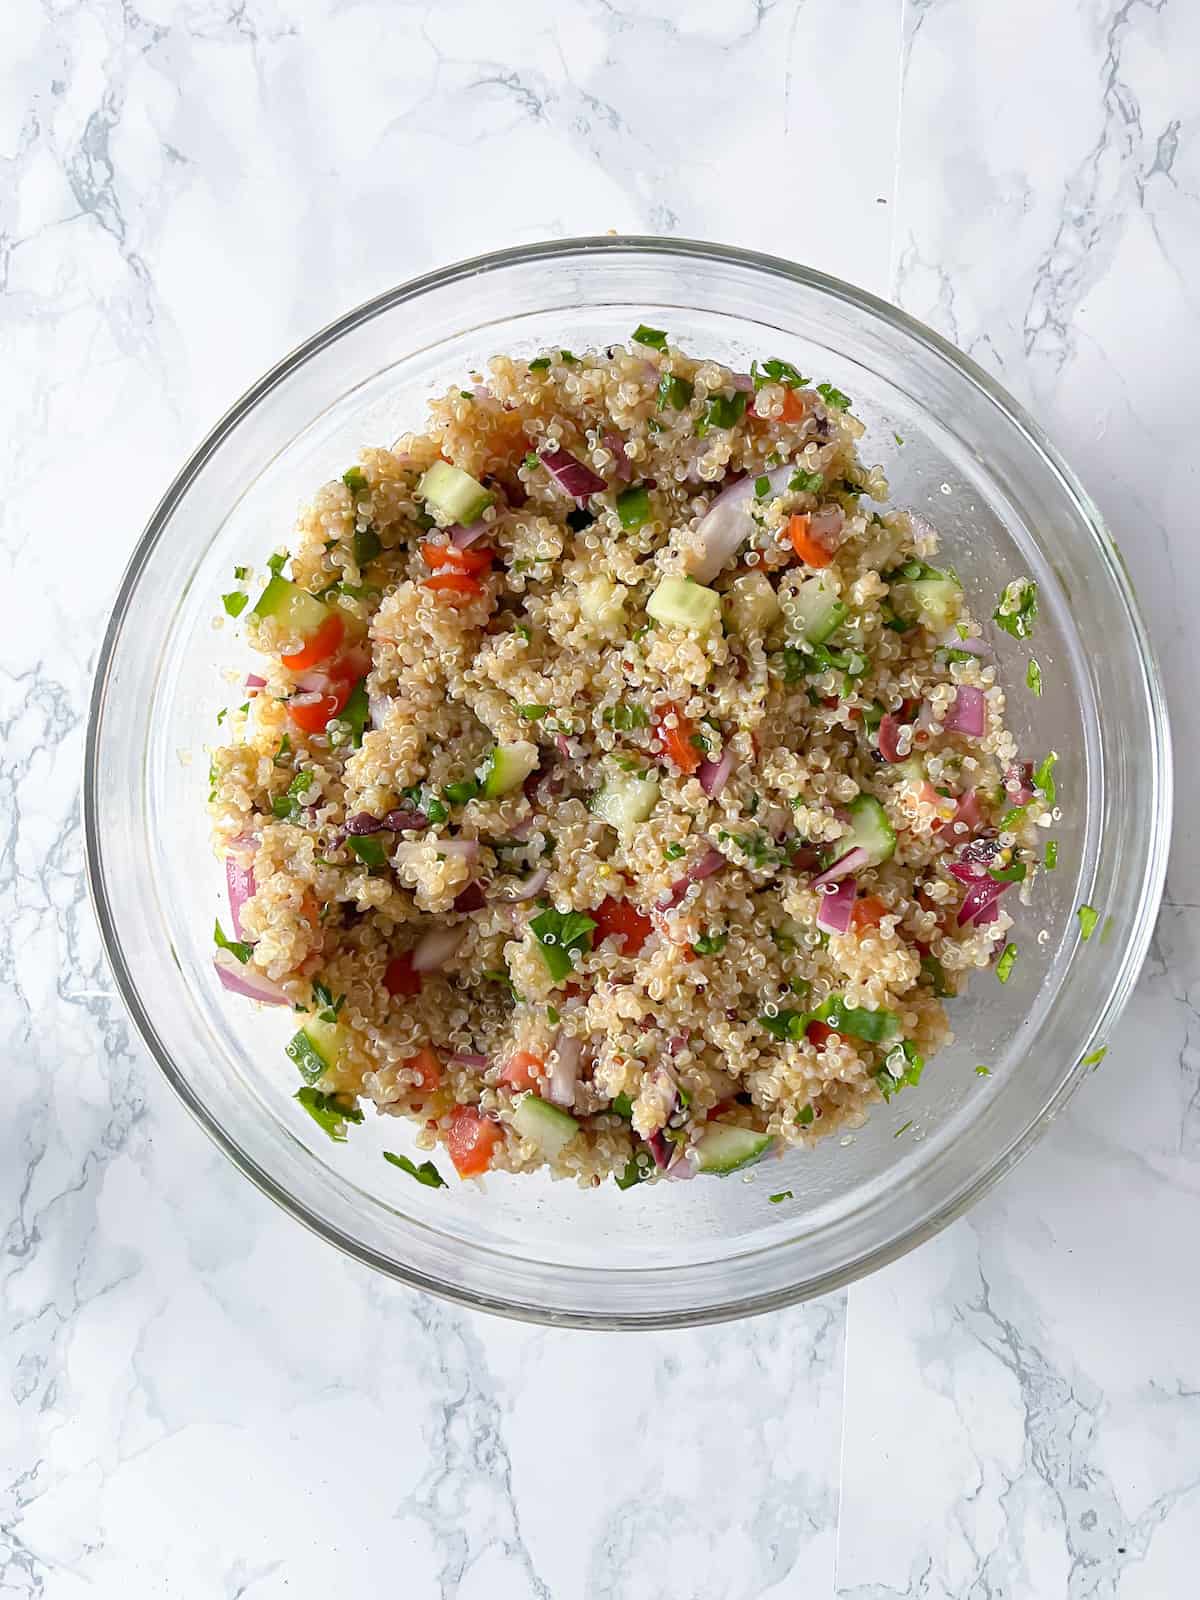 quinoa mixed with vegetables and dressing in a small glass bowl